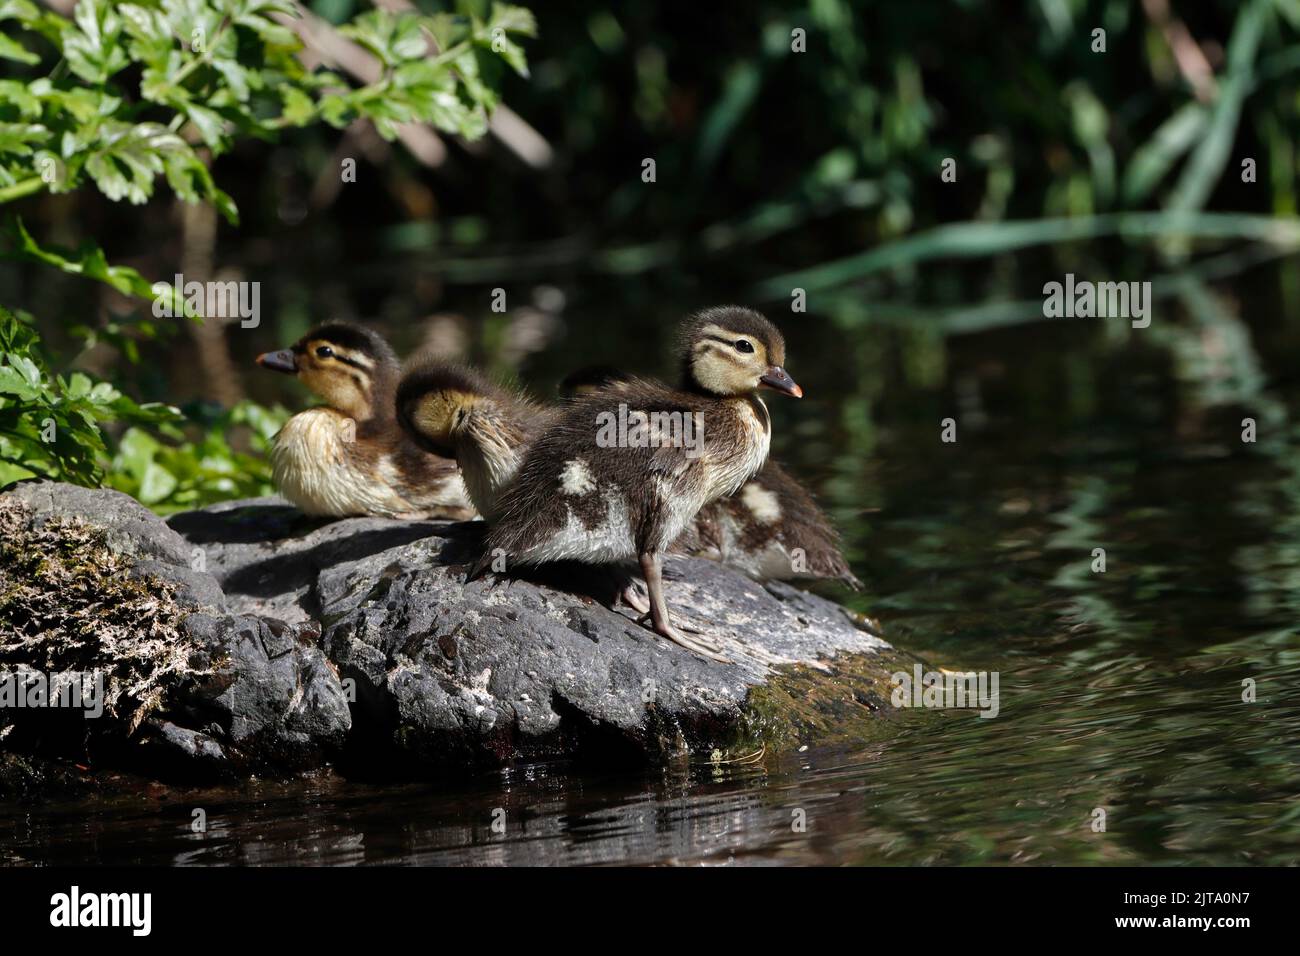 MANDARIN ducklings on a rock in the middle of a river, UK. Stock Photo